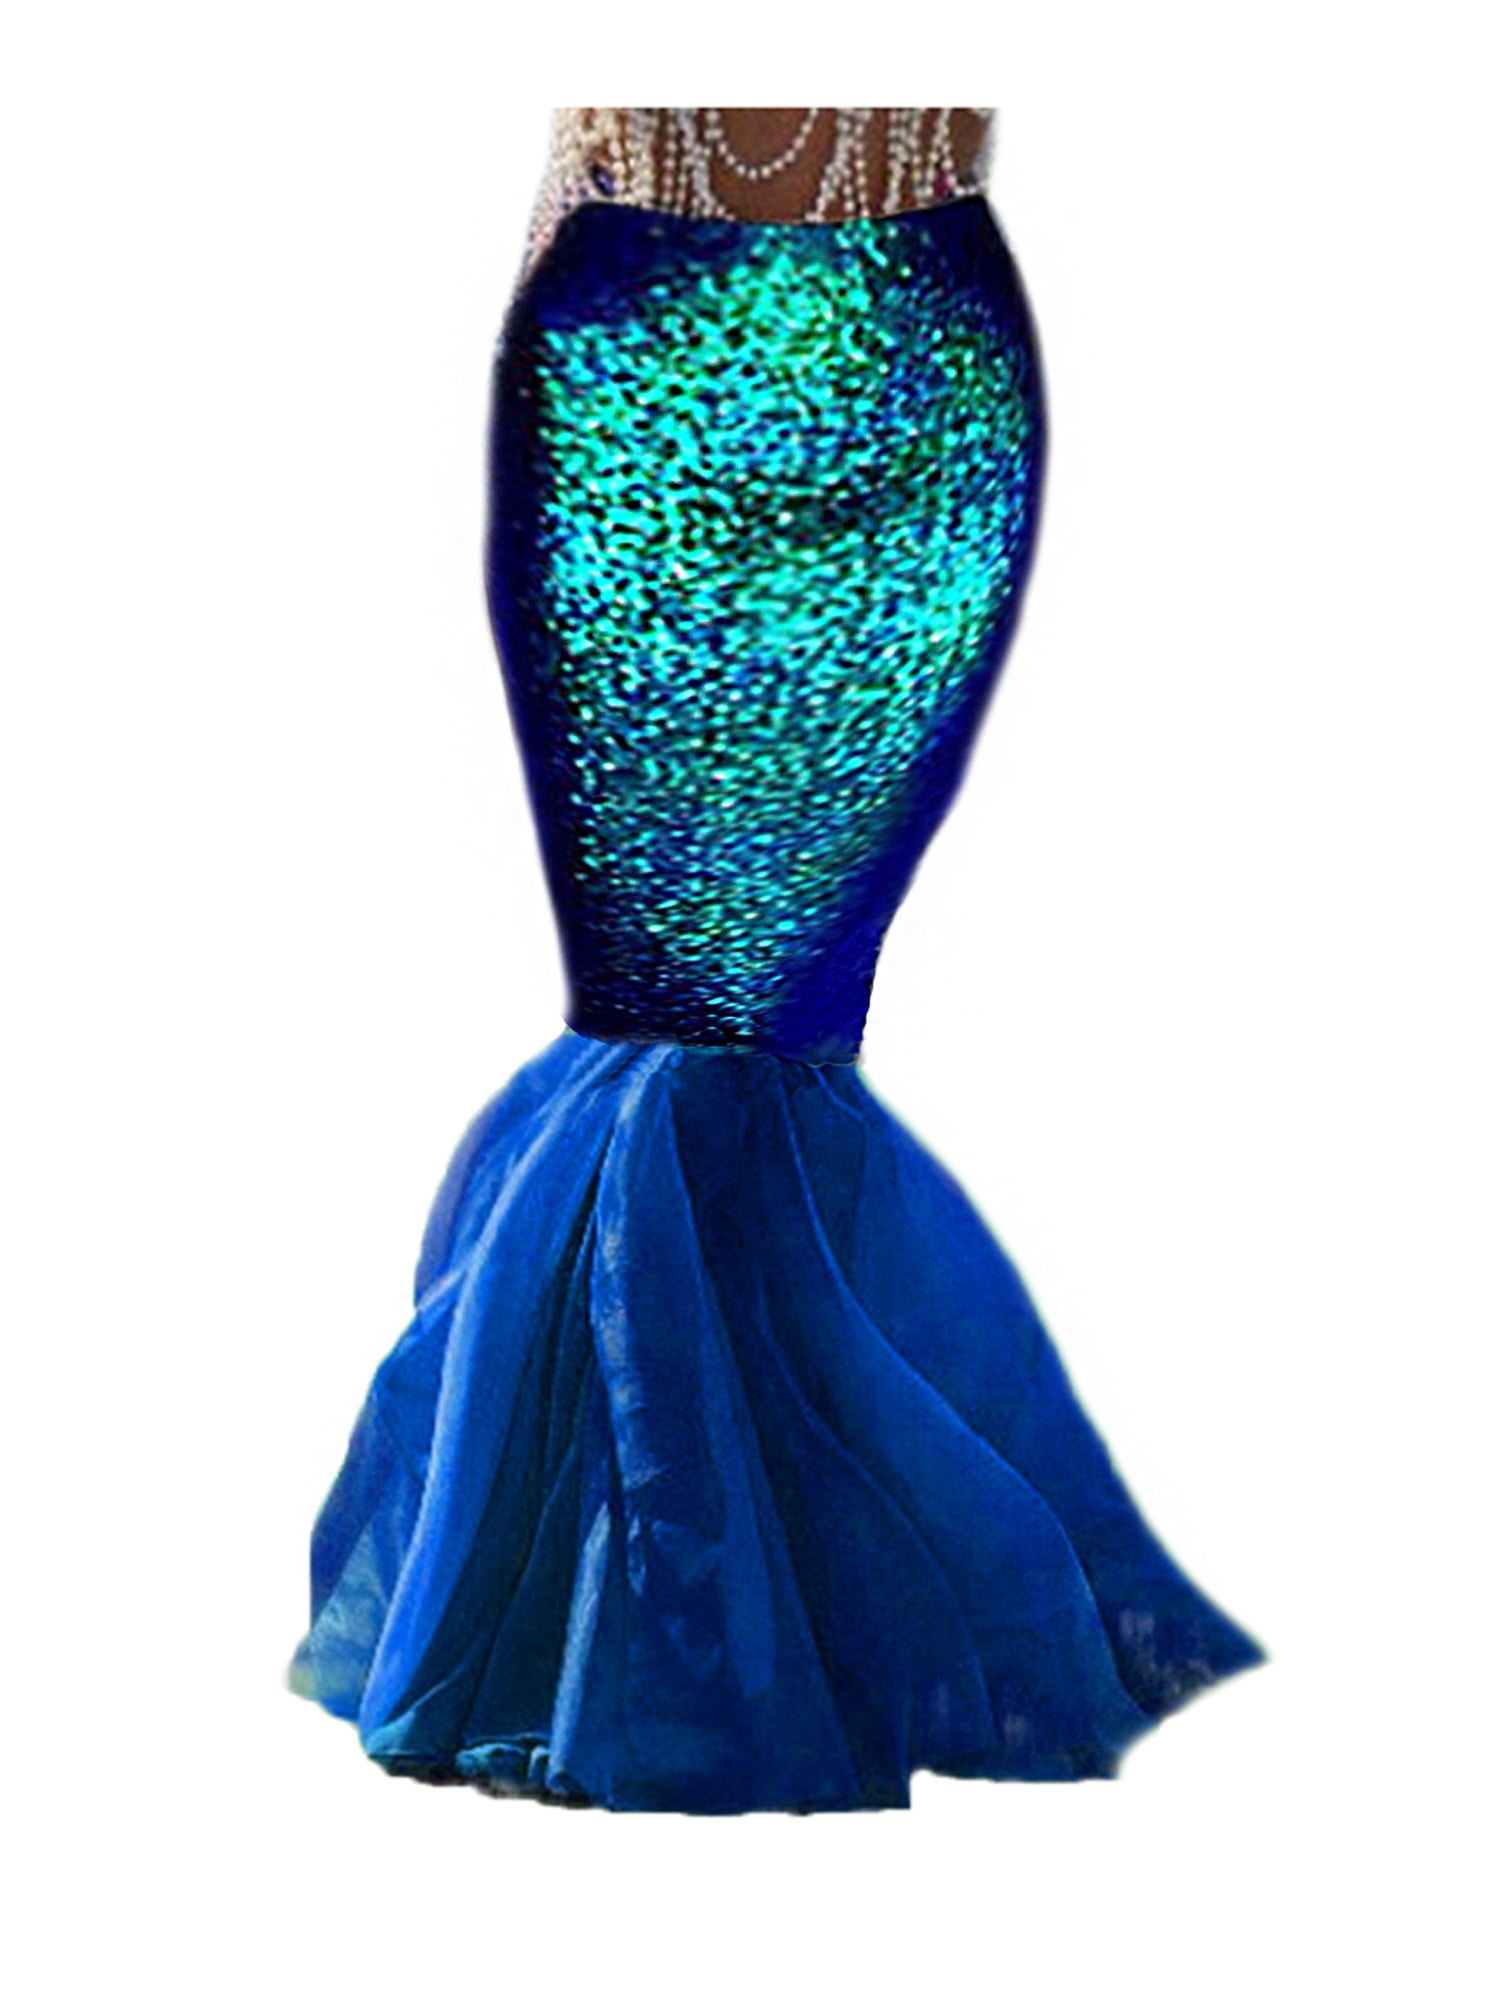 Womens Mermaid Costume Cosplay Halloween Party Sequined Long Dress Tail Skirt